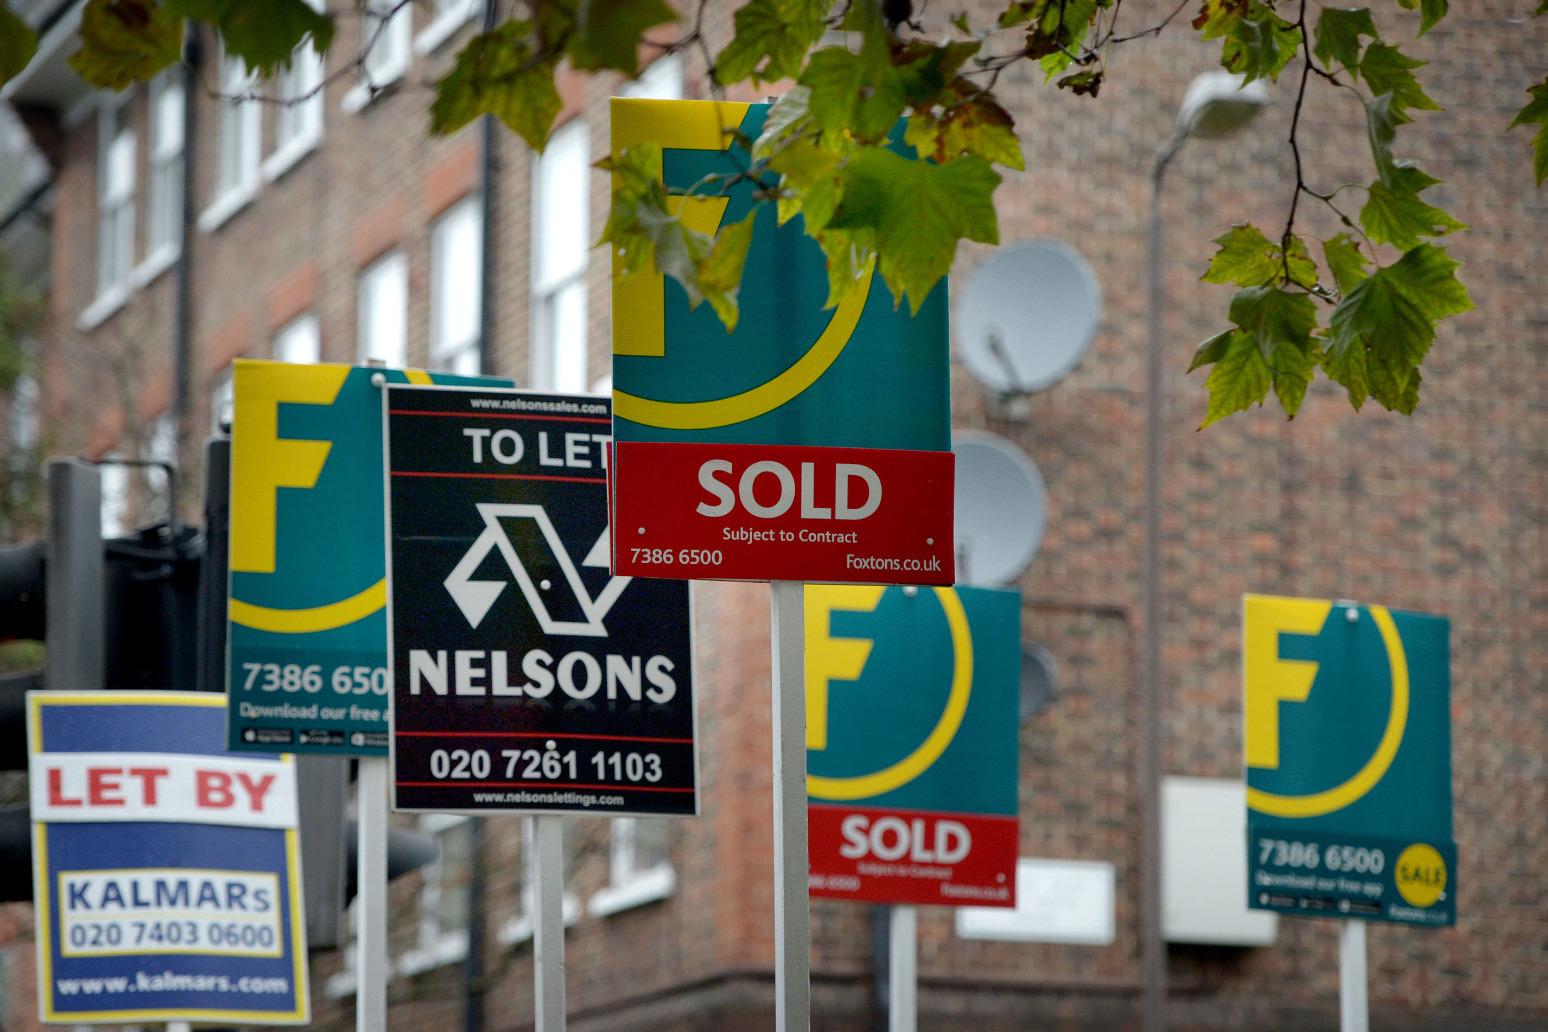 Home buyers’ preferences shifting towards flats as living costs rise 